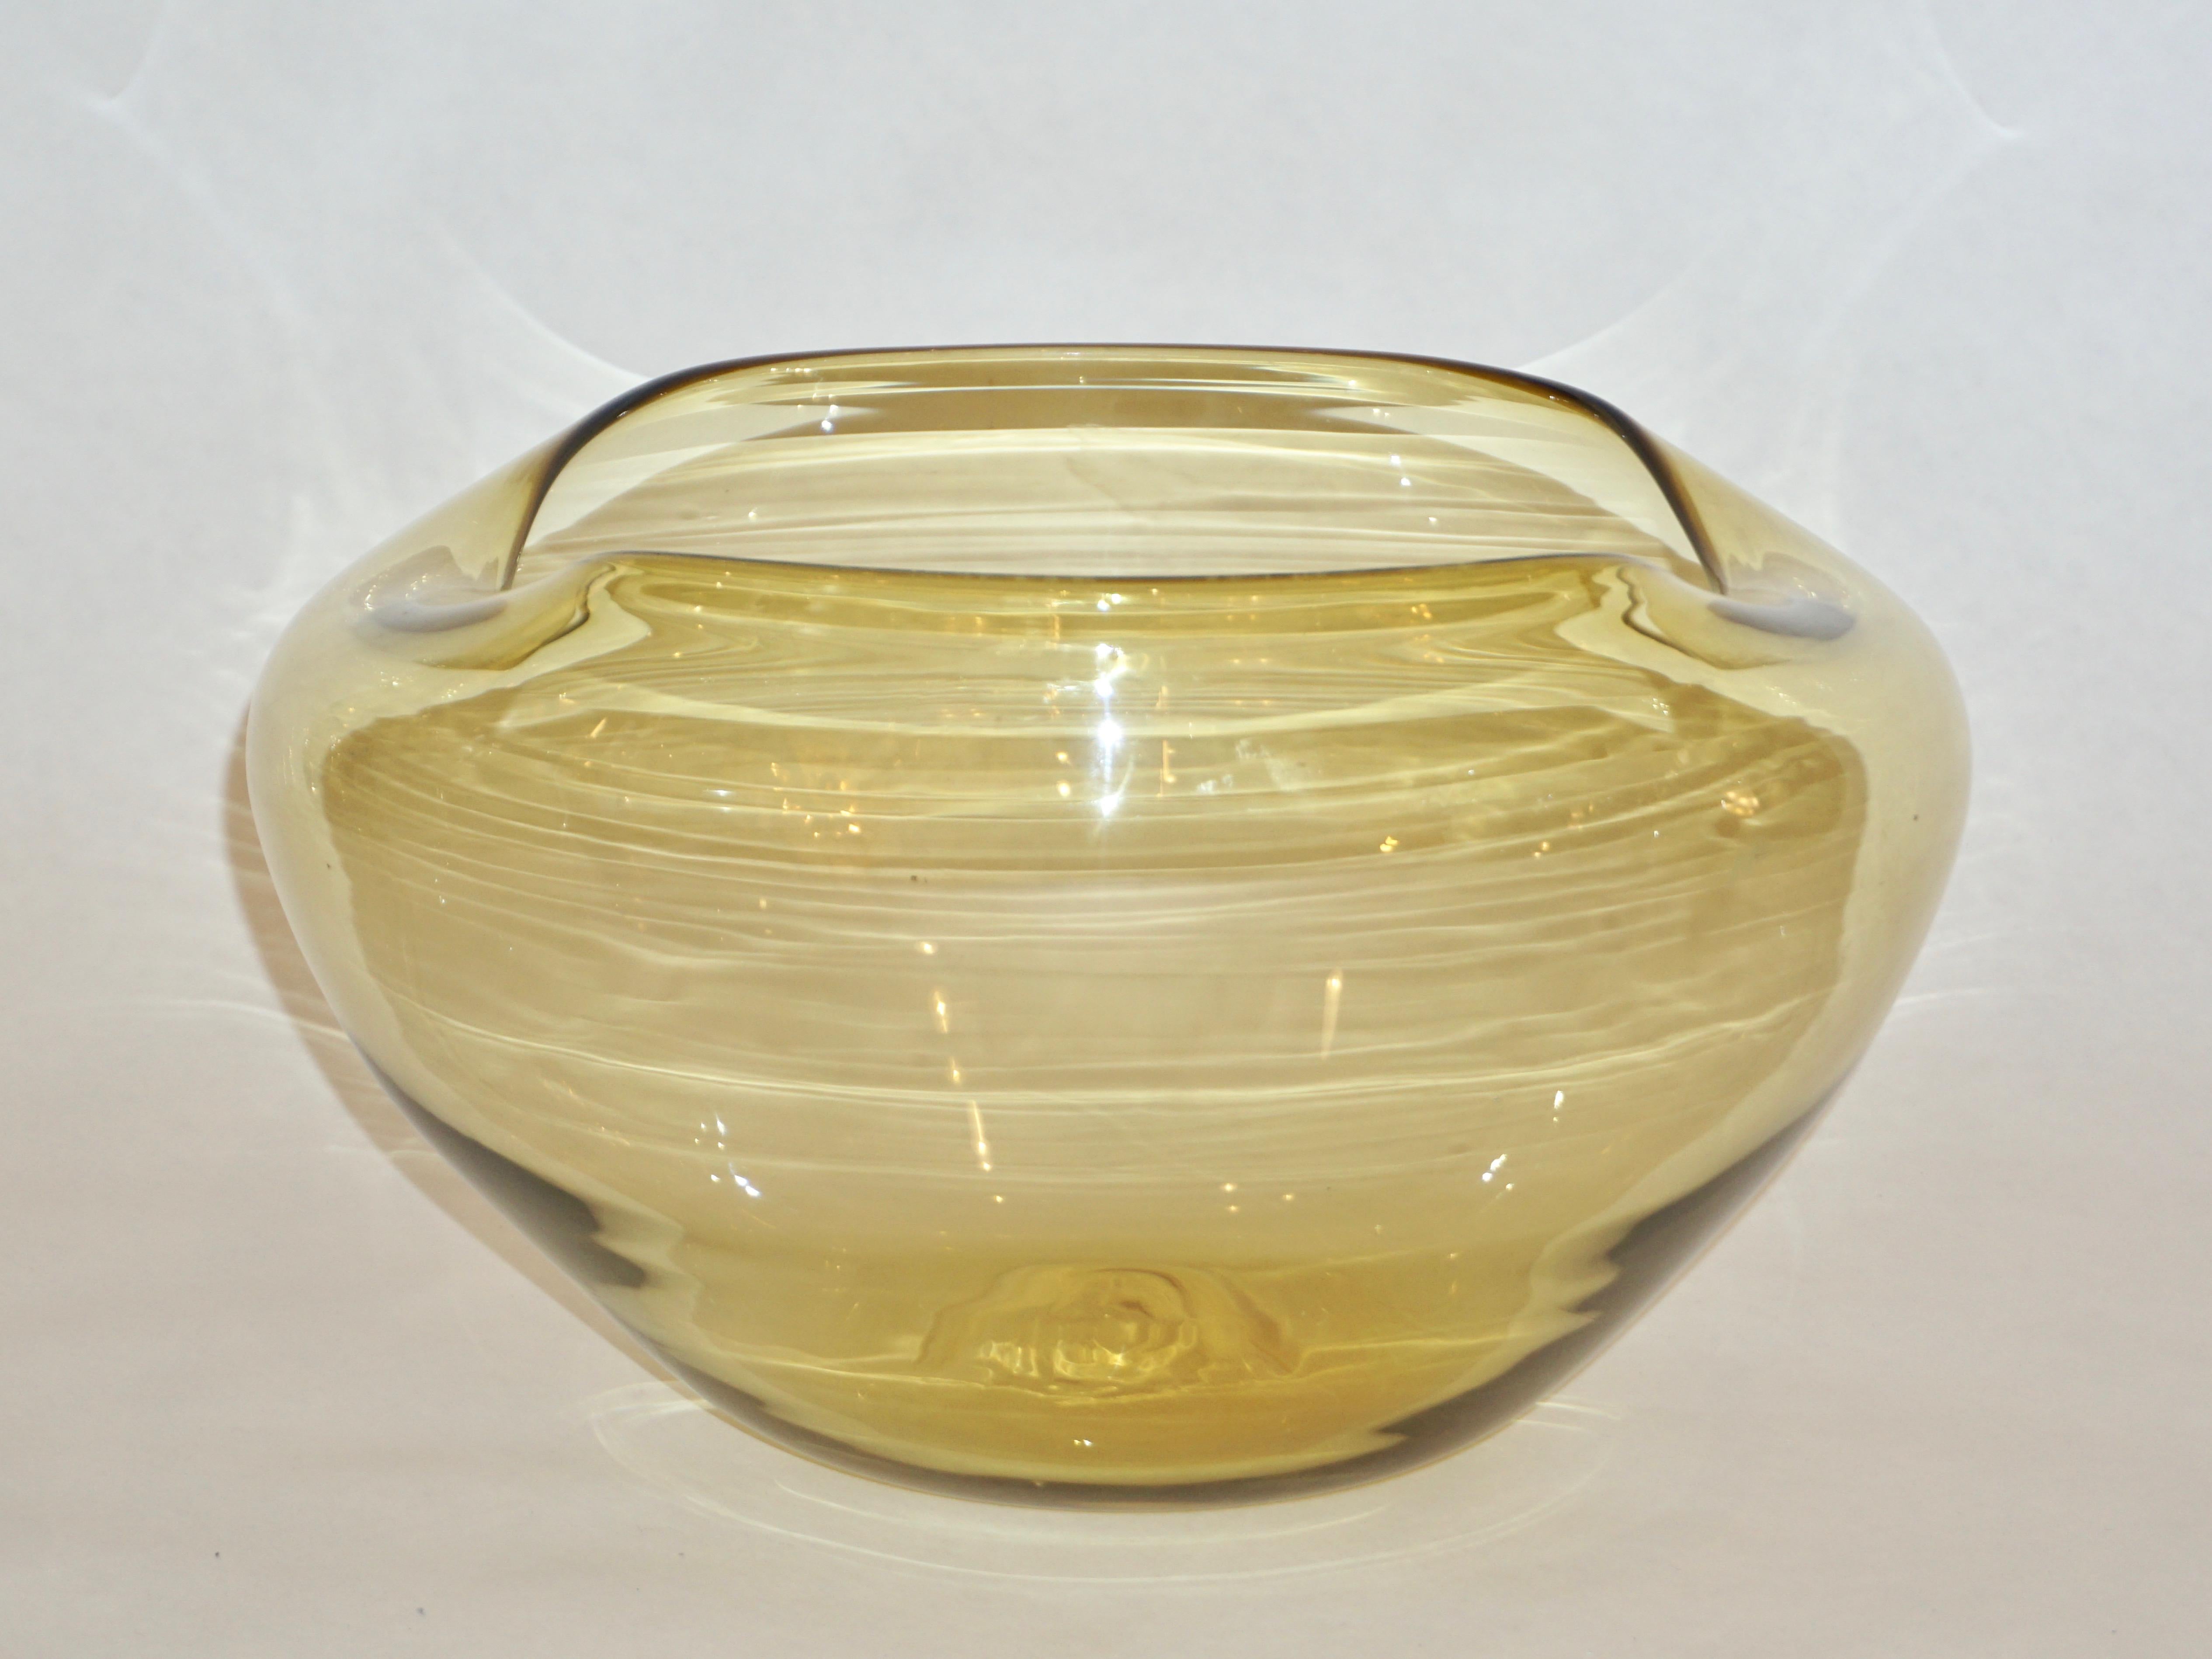 A minimalist yet sophisticated blown Murano glass vessel by Salviati, with signature, in warm honey amber color of organic modern design, waved border creating an inspiring abstract shape.
Can be accompanied by 2 other bowls as per photograph.